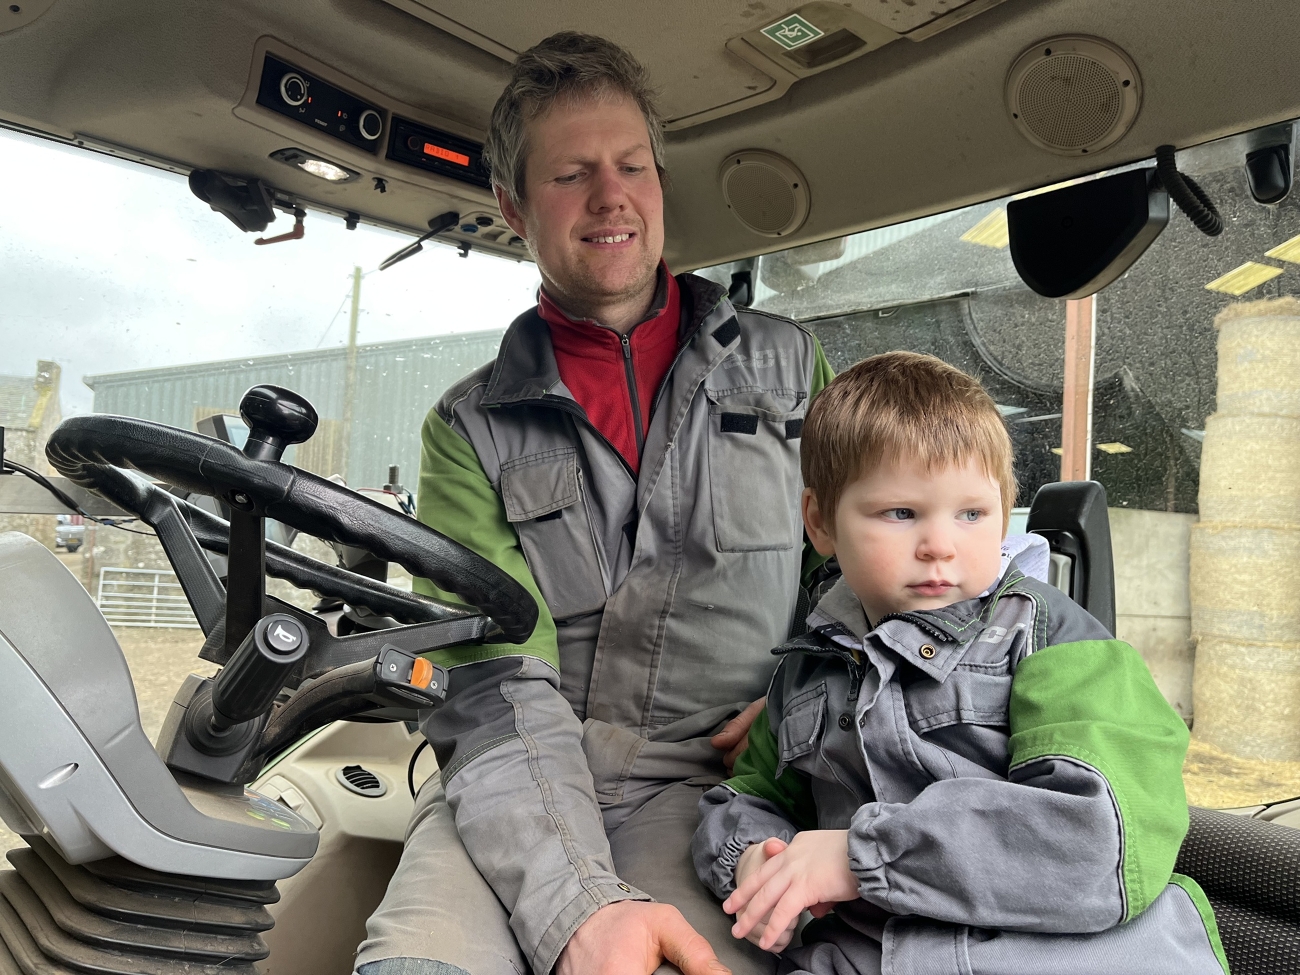 Johne Whiteford and his son sit on a tractor.